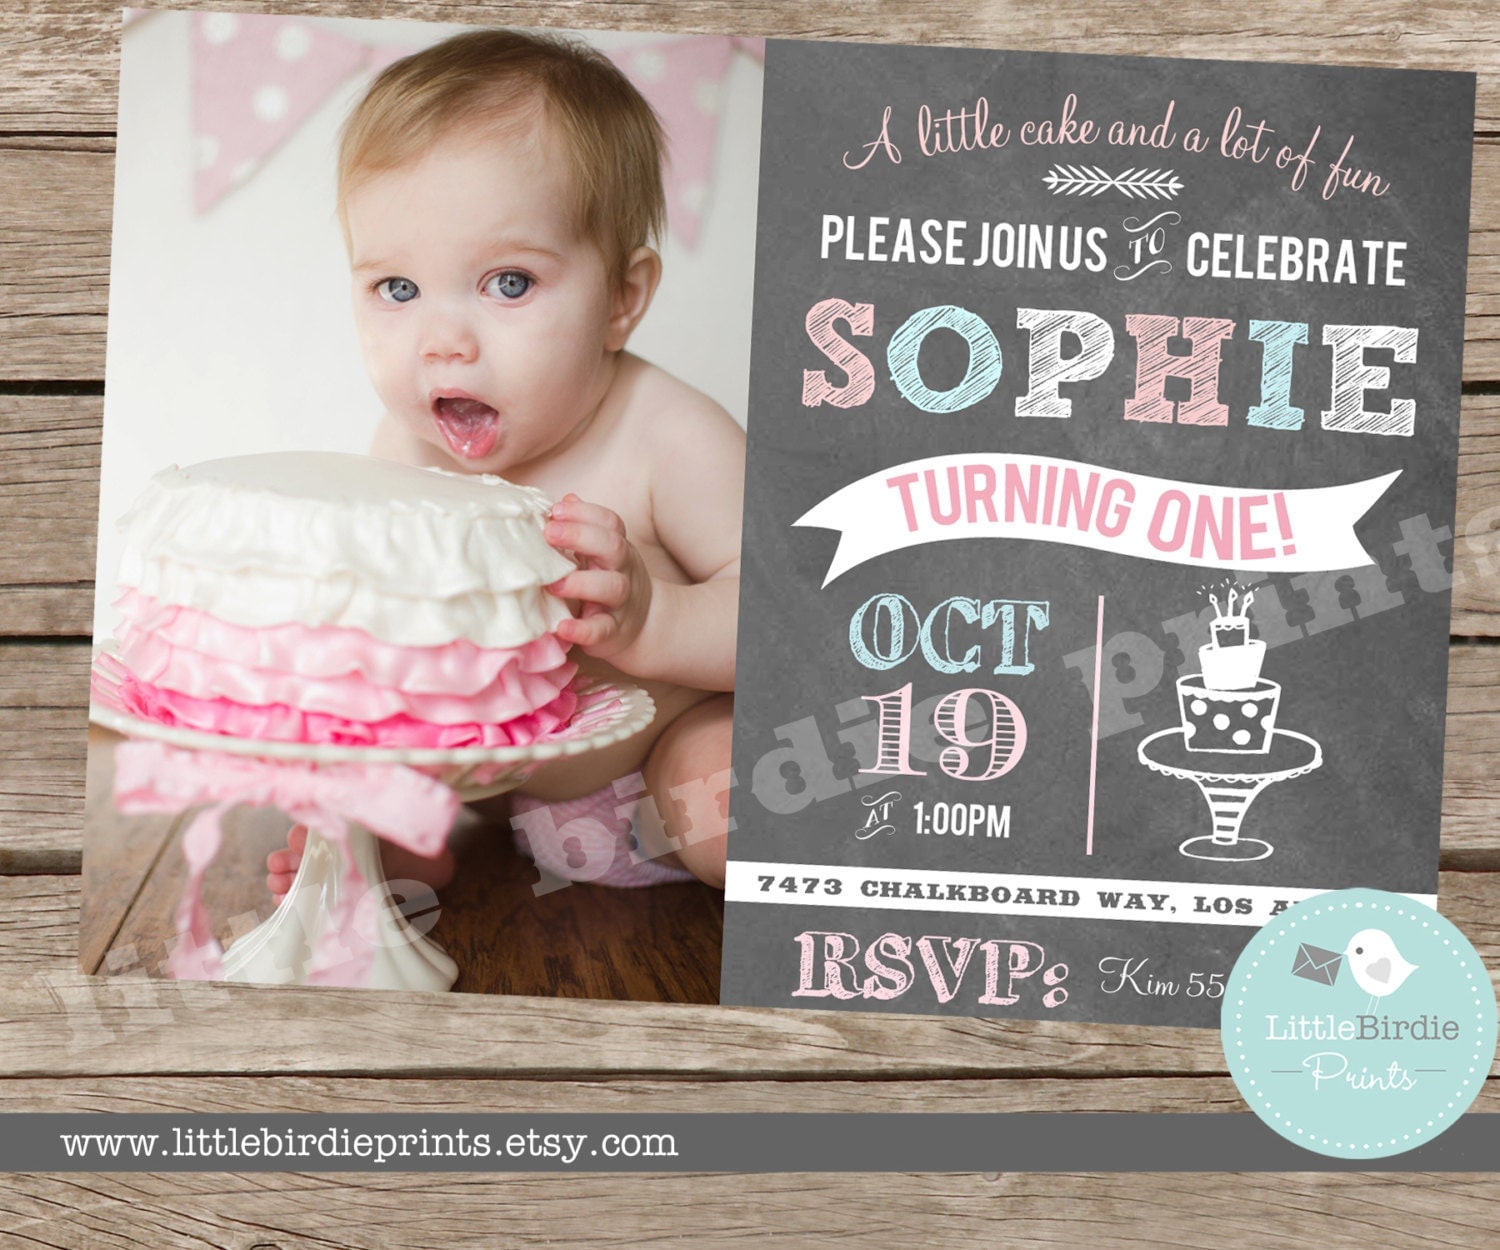 First Birthday Invitations: Customize Your Invitation | Send Bottle Message